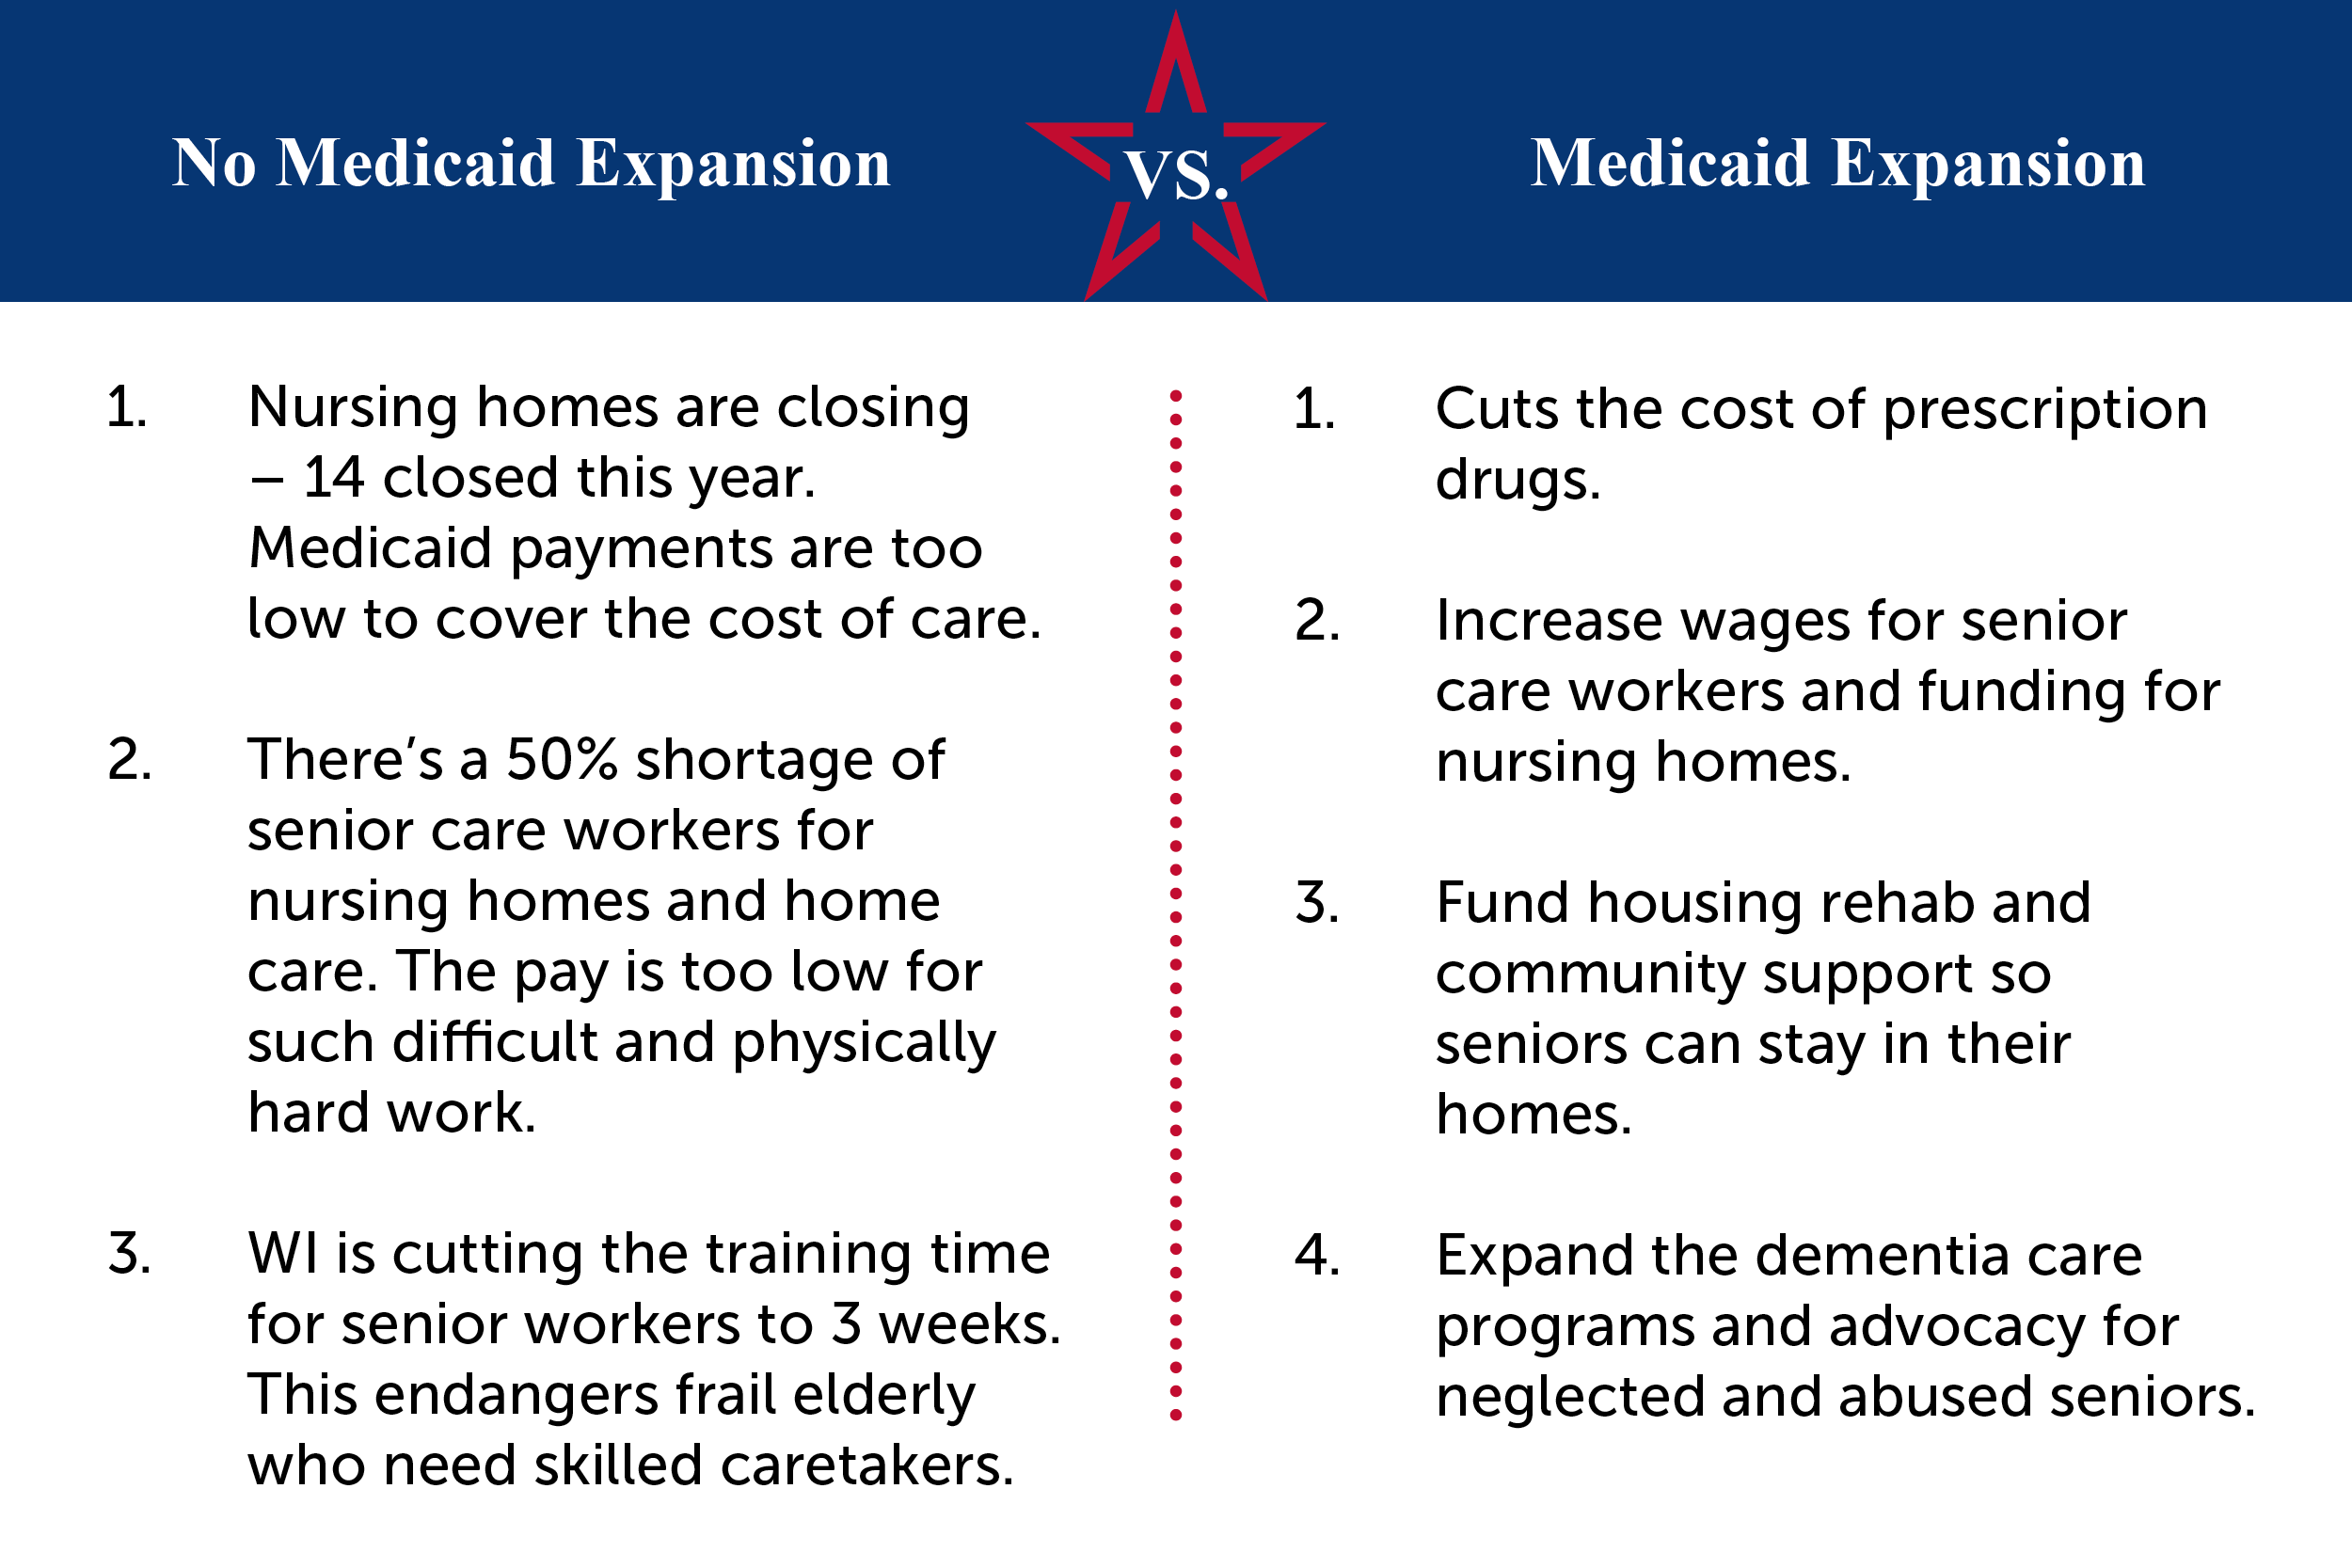 Fighting for Medicaid Expansion in 2019!